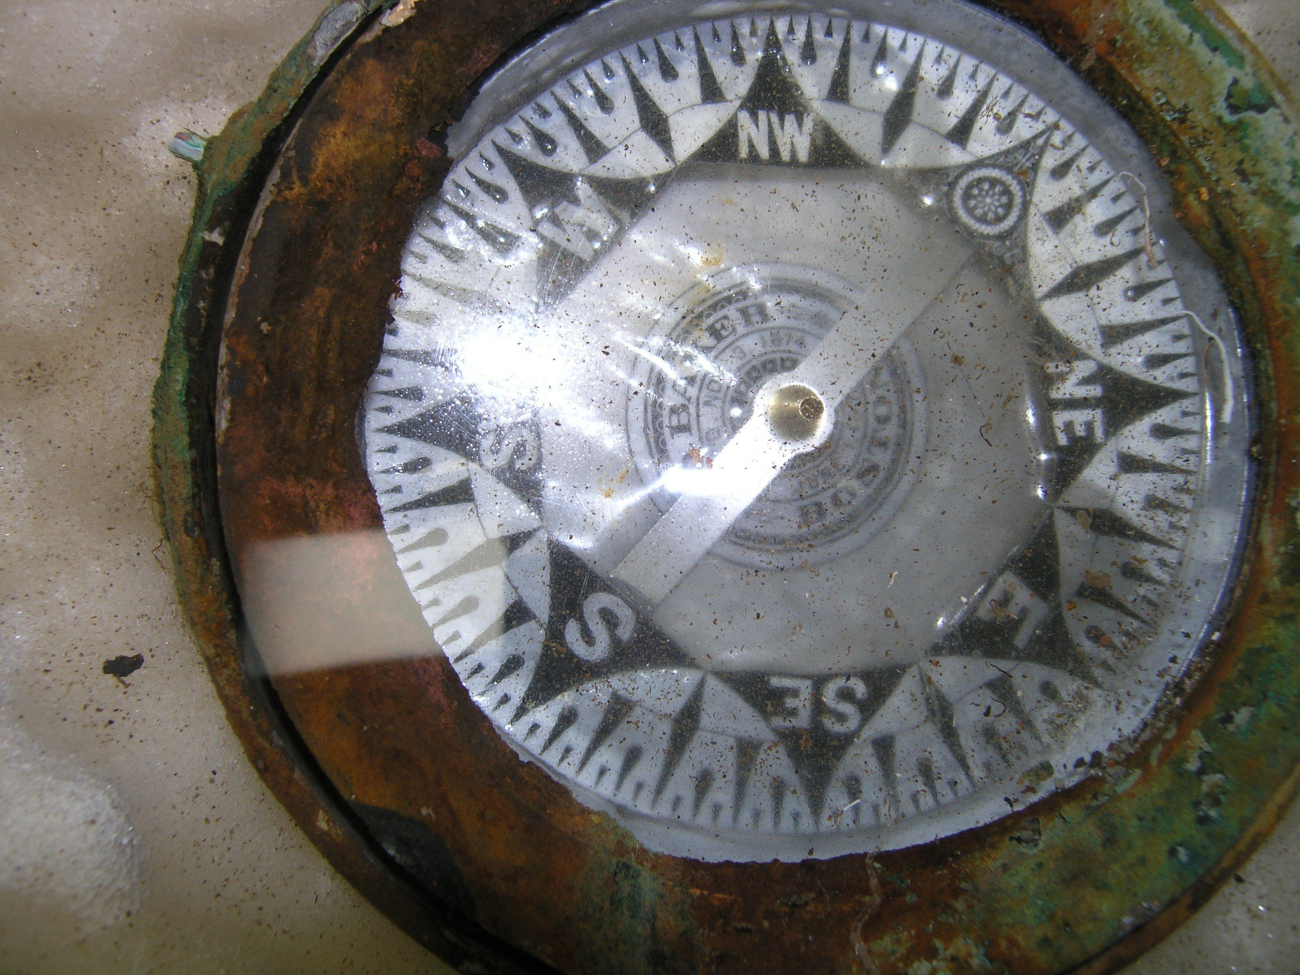 The card of the compass is still intact revealing the manufacturer and date ofthe compass patent